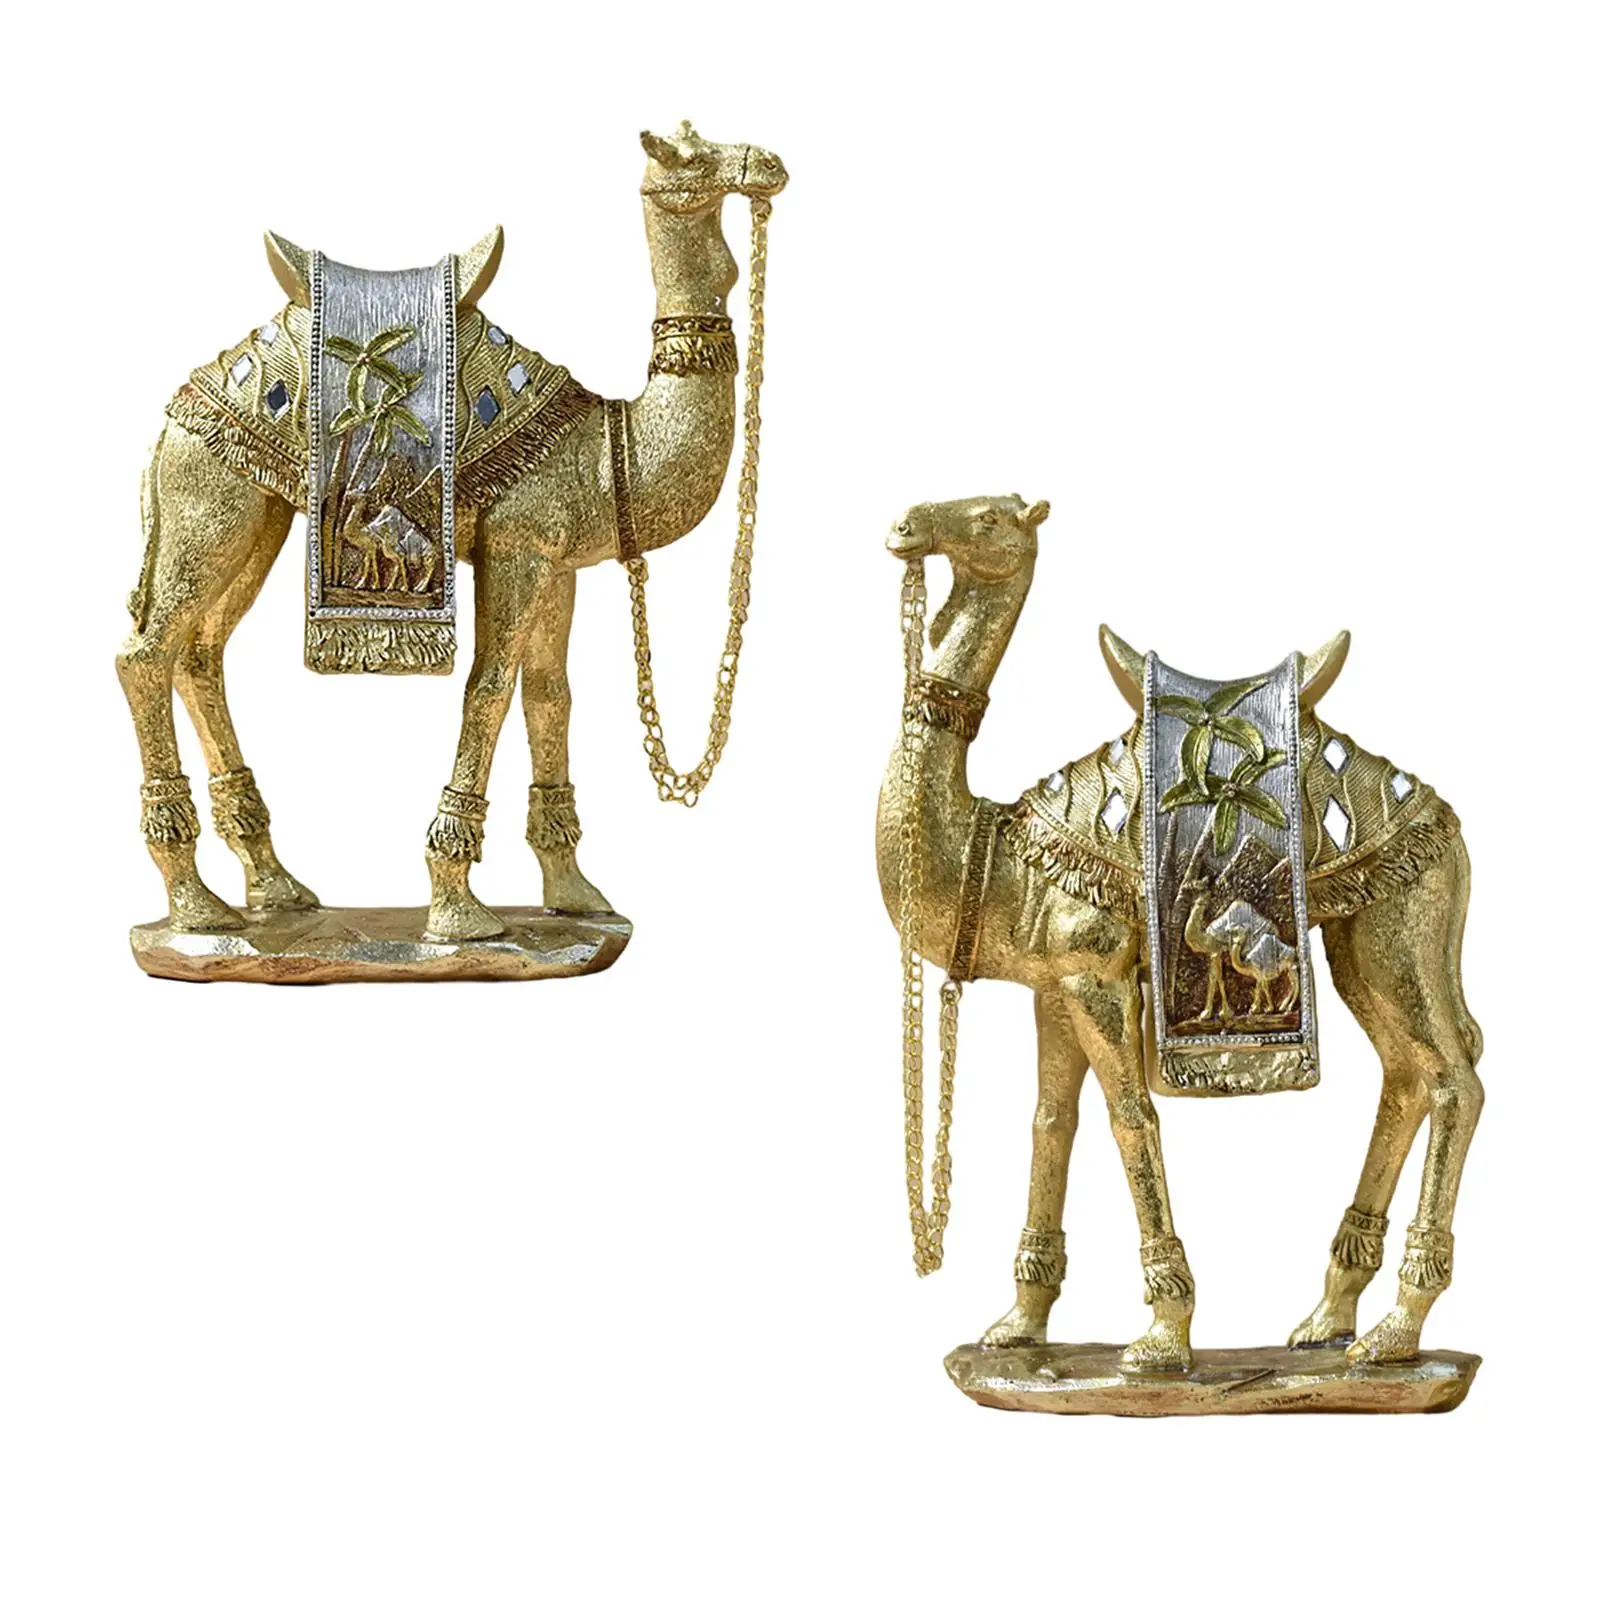 Camel Figurine Camel Sculpture Resin Animal Statue Art Craft Ornament for Fireplace Bedroom Home Decoration Birthday Gift